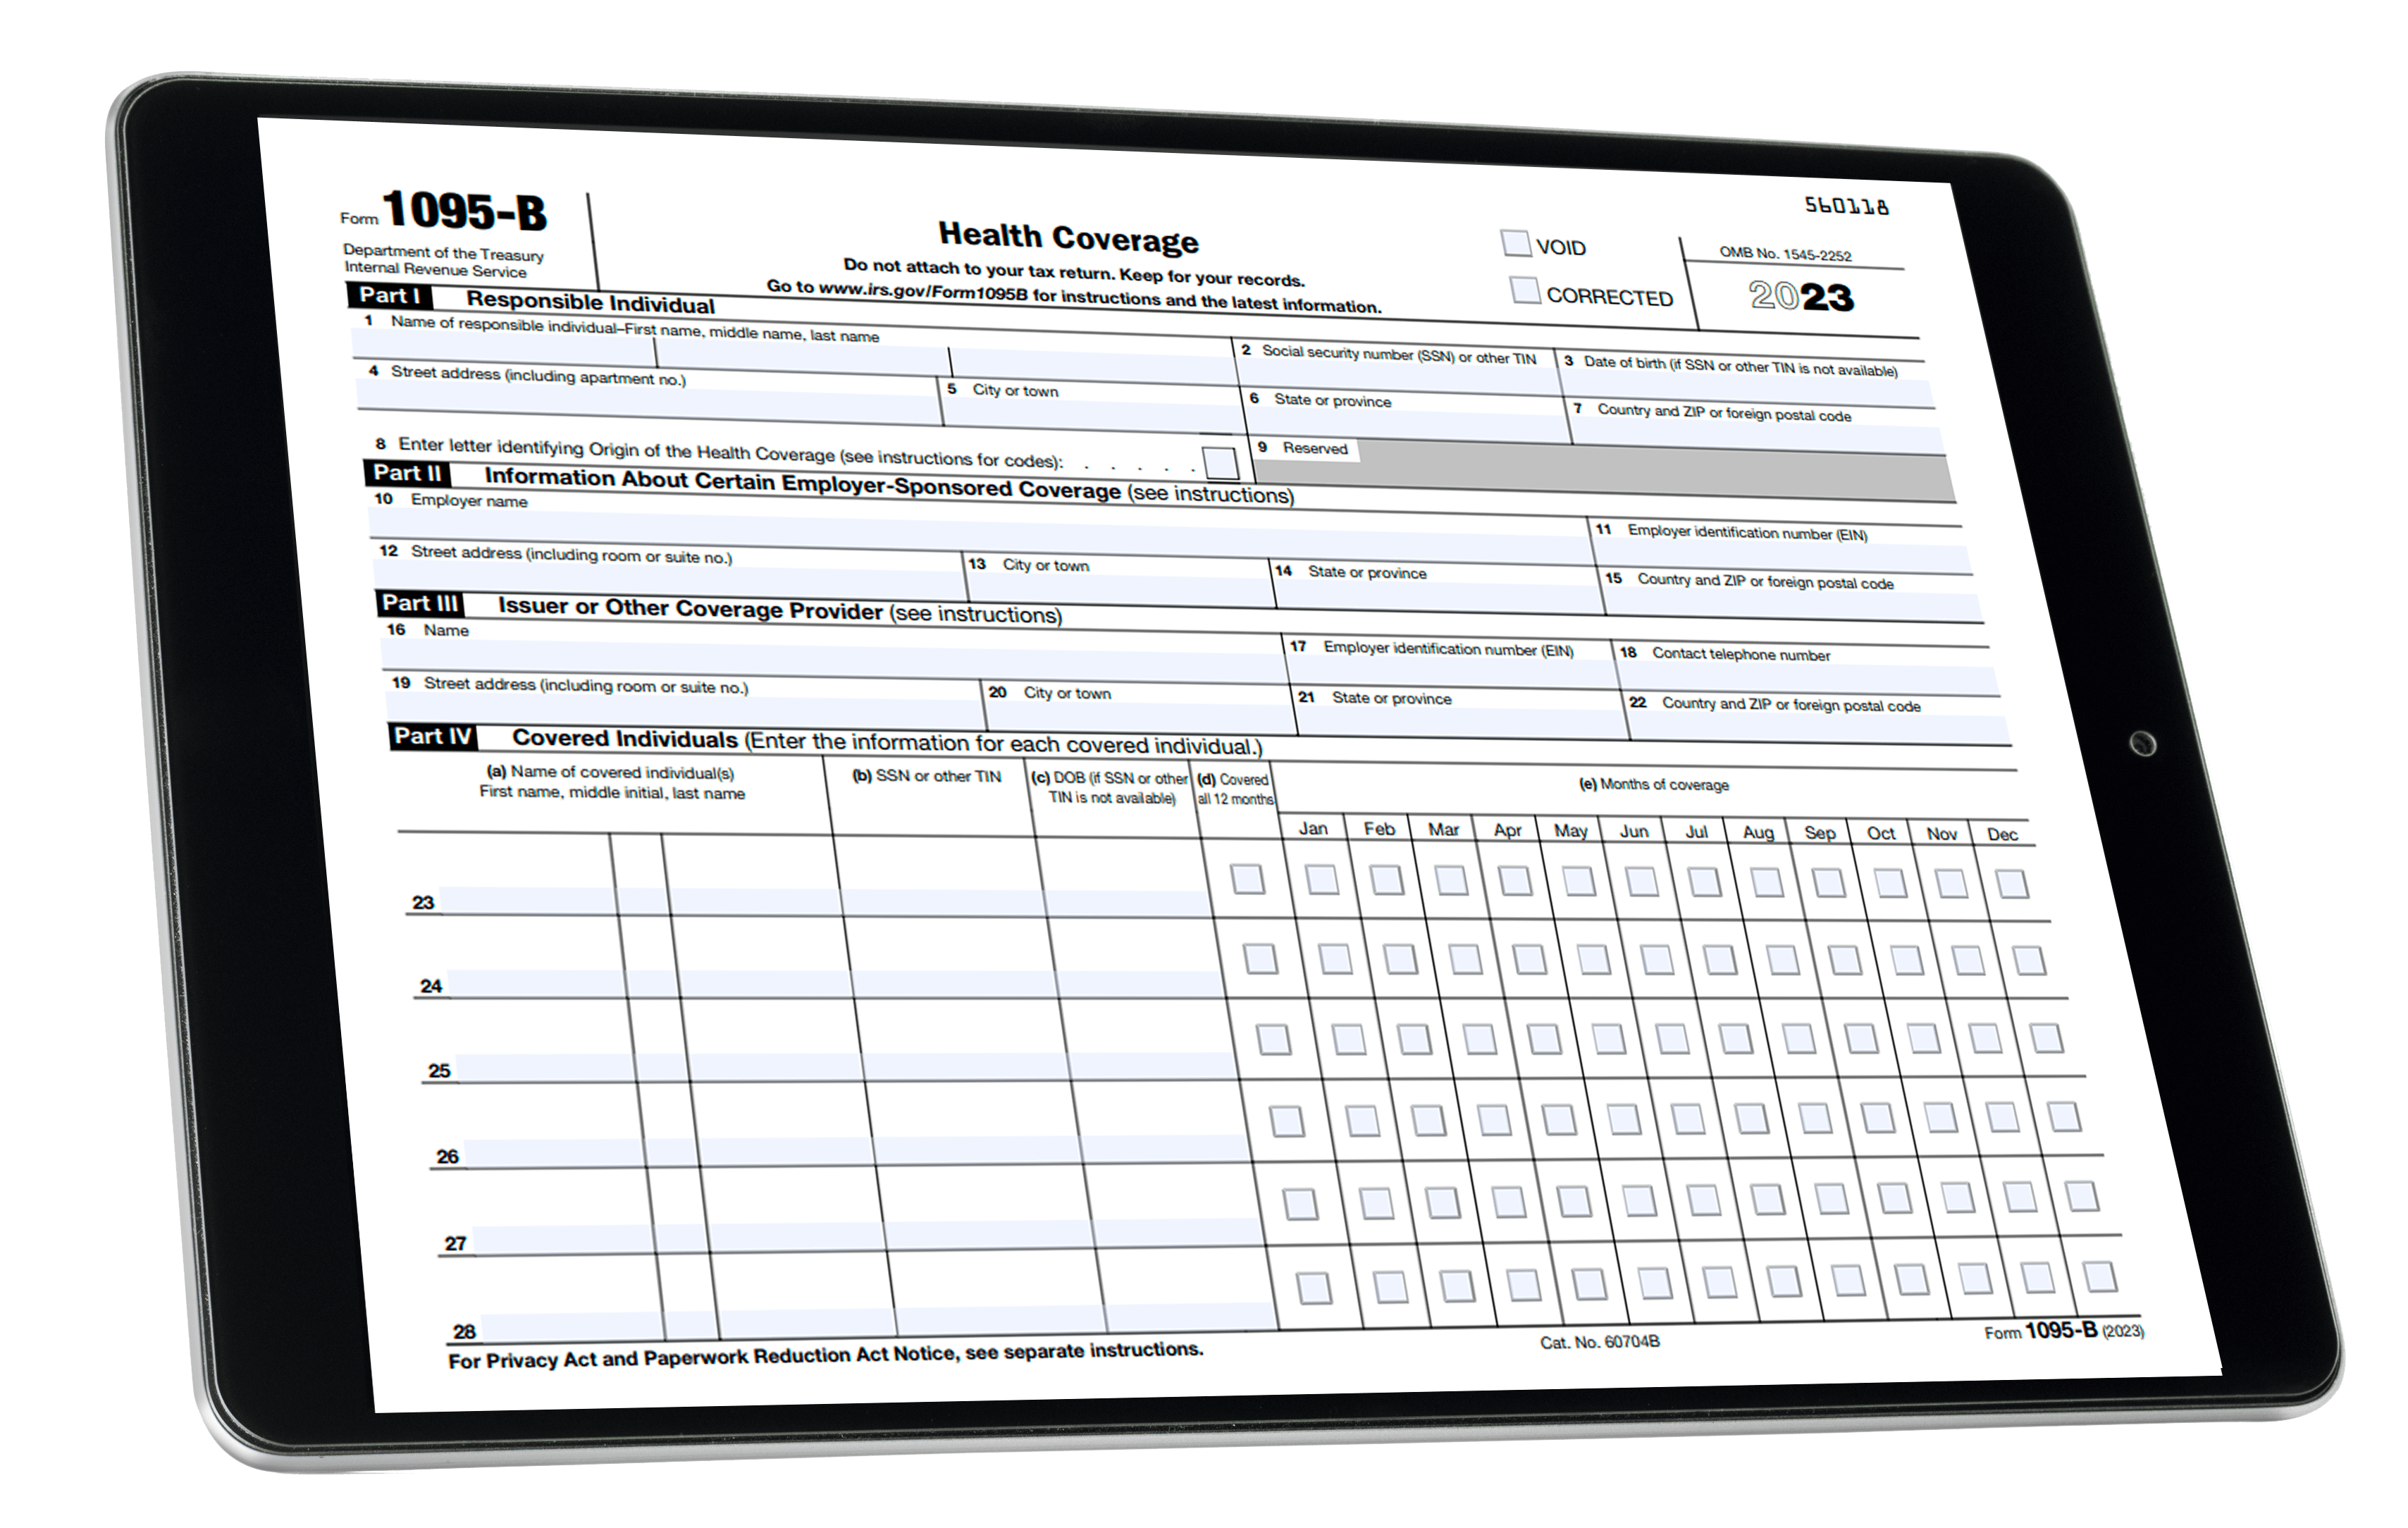 Form 1095-B for 2023